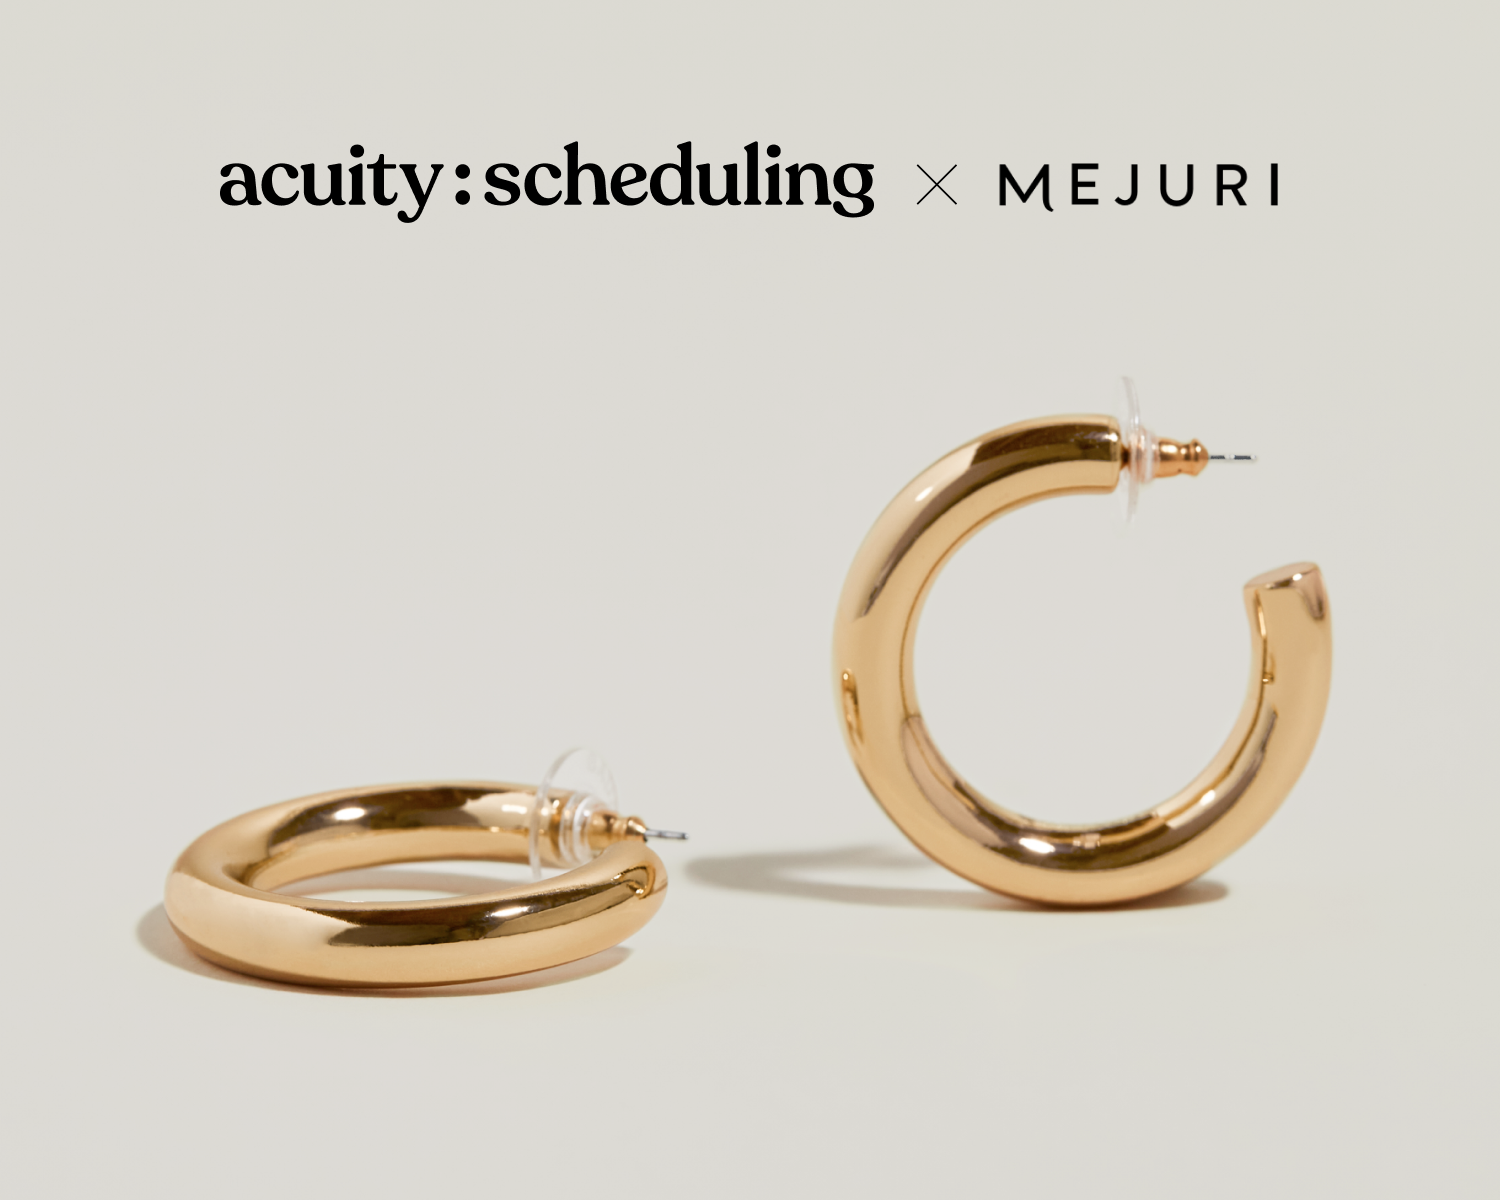 How Acuity Scheduling Helps Mejuri Style Customers Across Locations